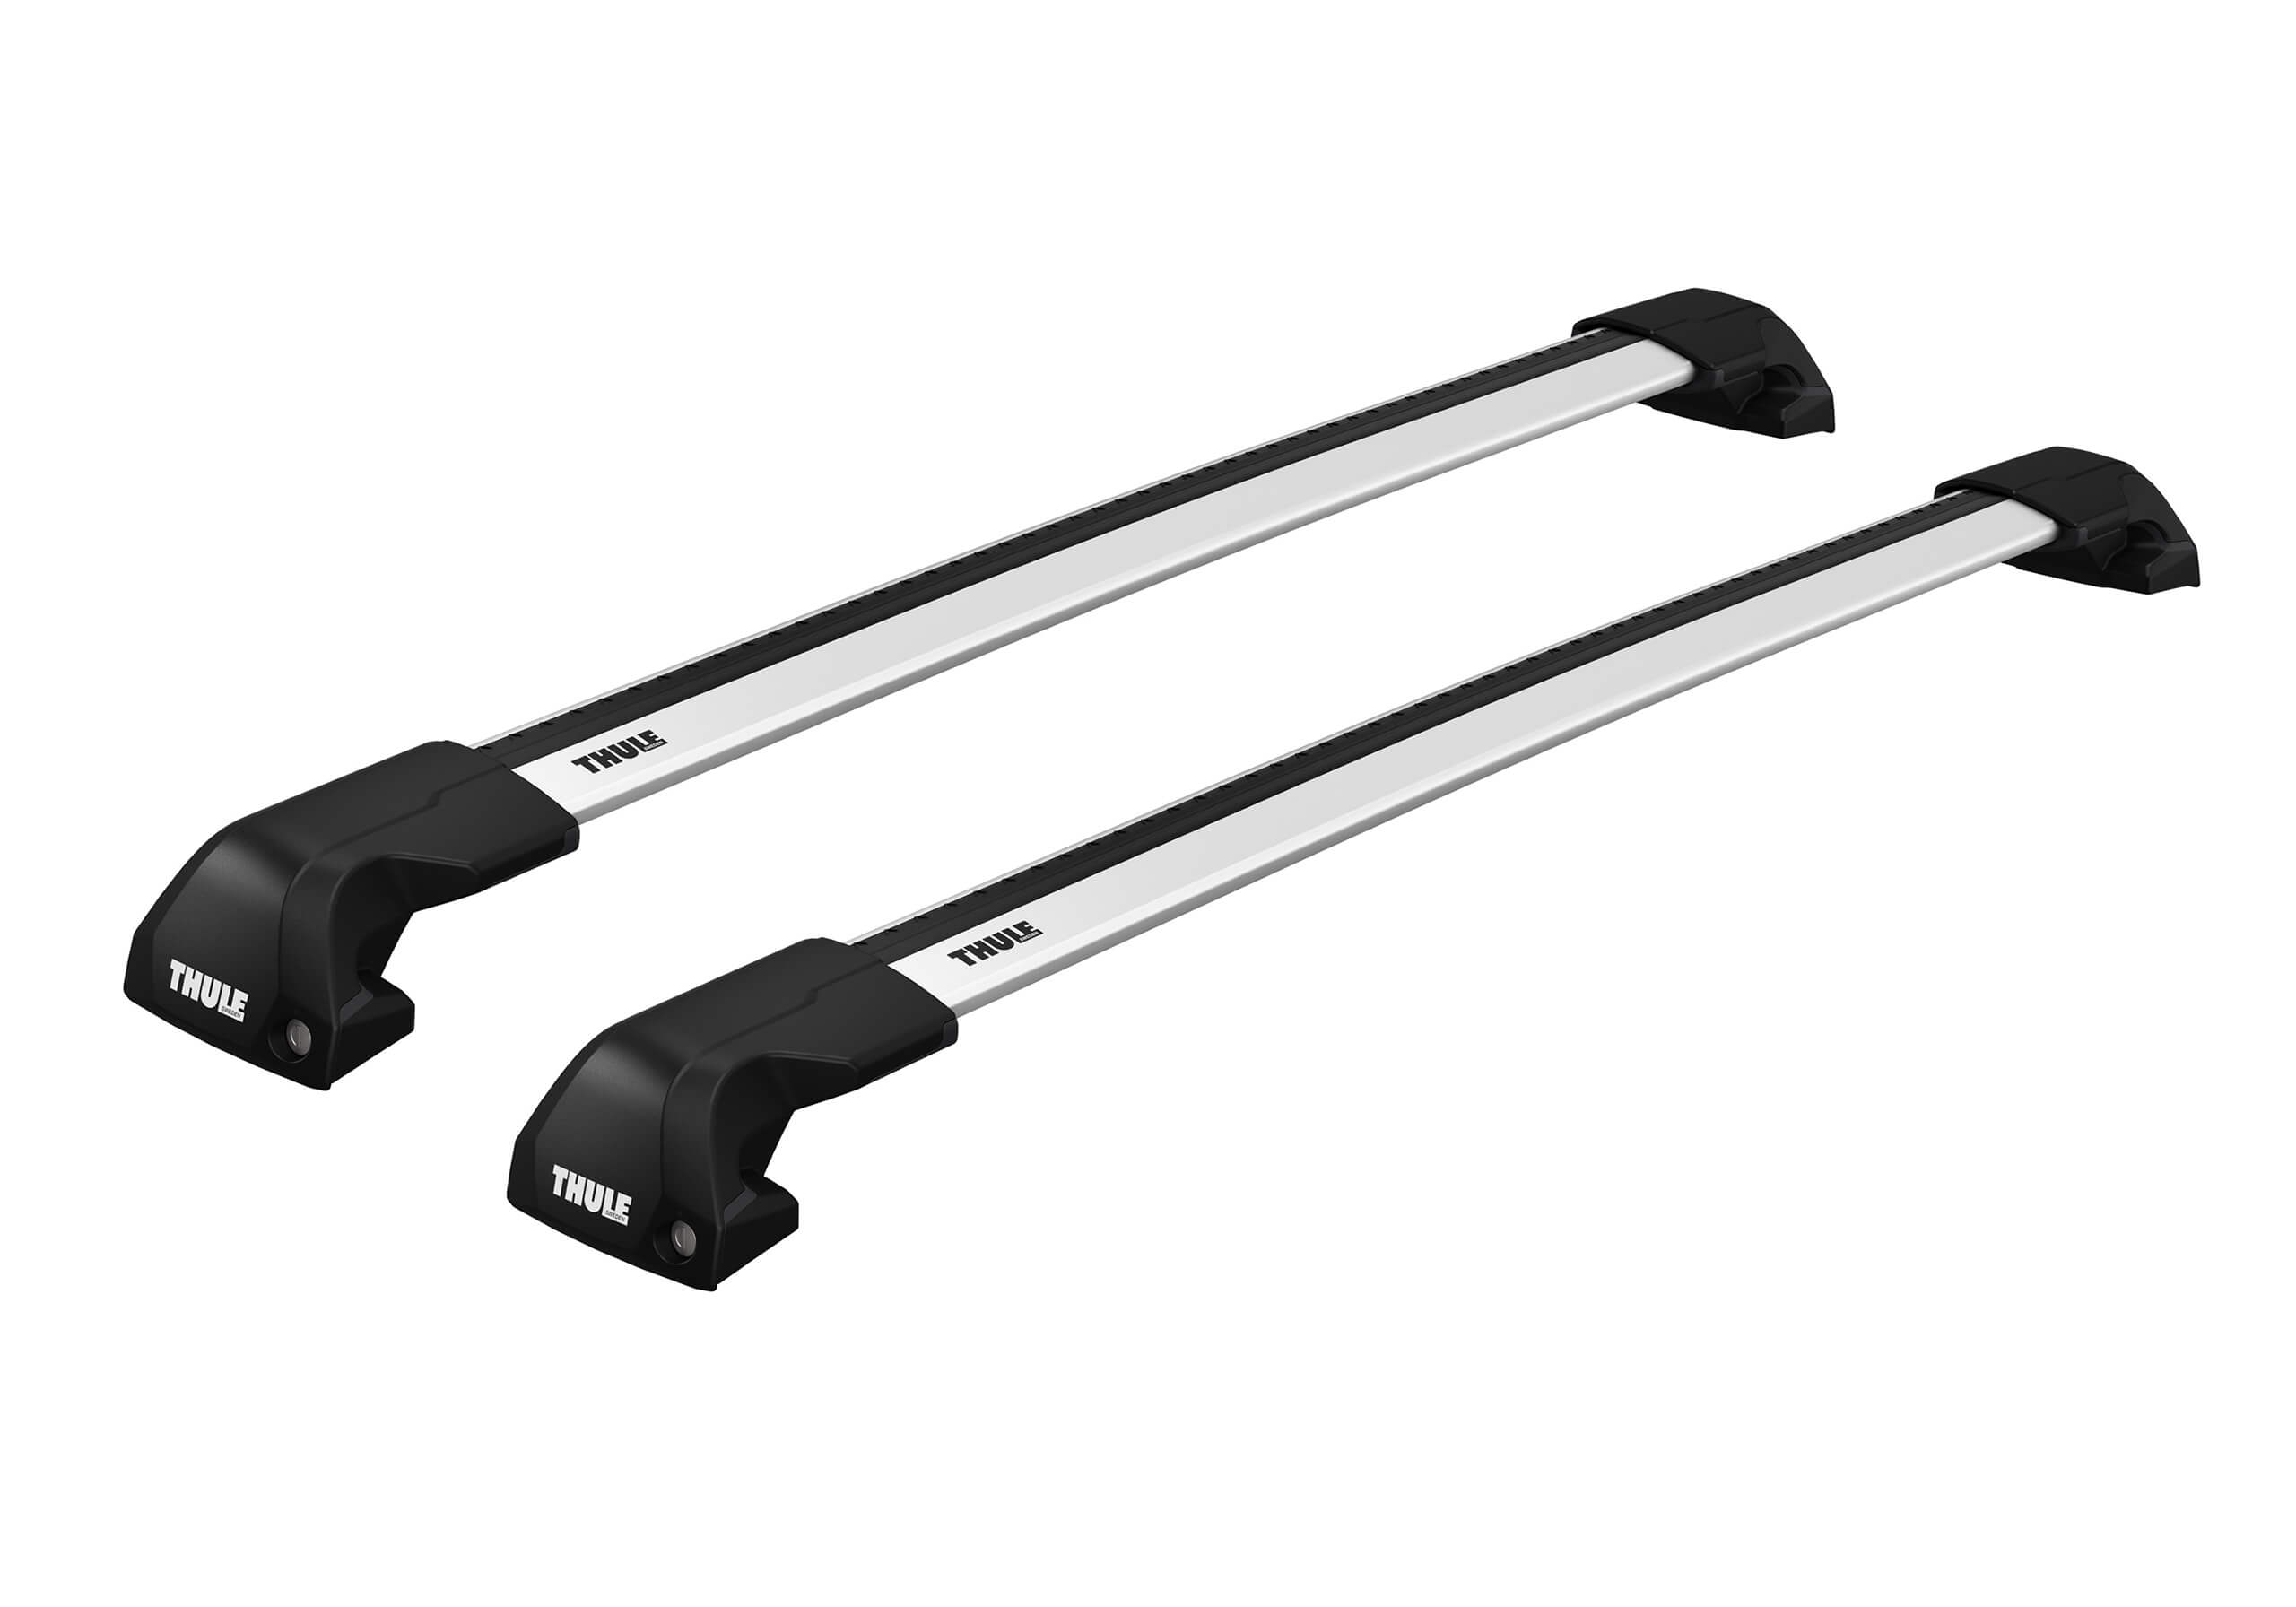 Jeep Compass (2011 to 2017):Thule Edge silver WingBars package - 7206, 7214, 7213, 6144